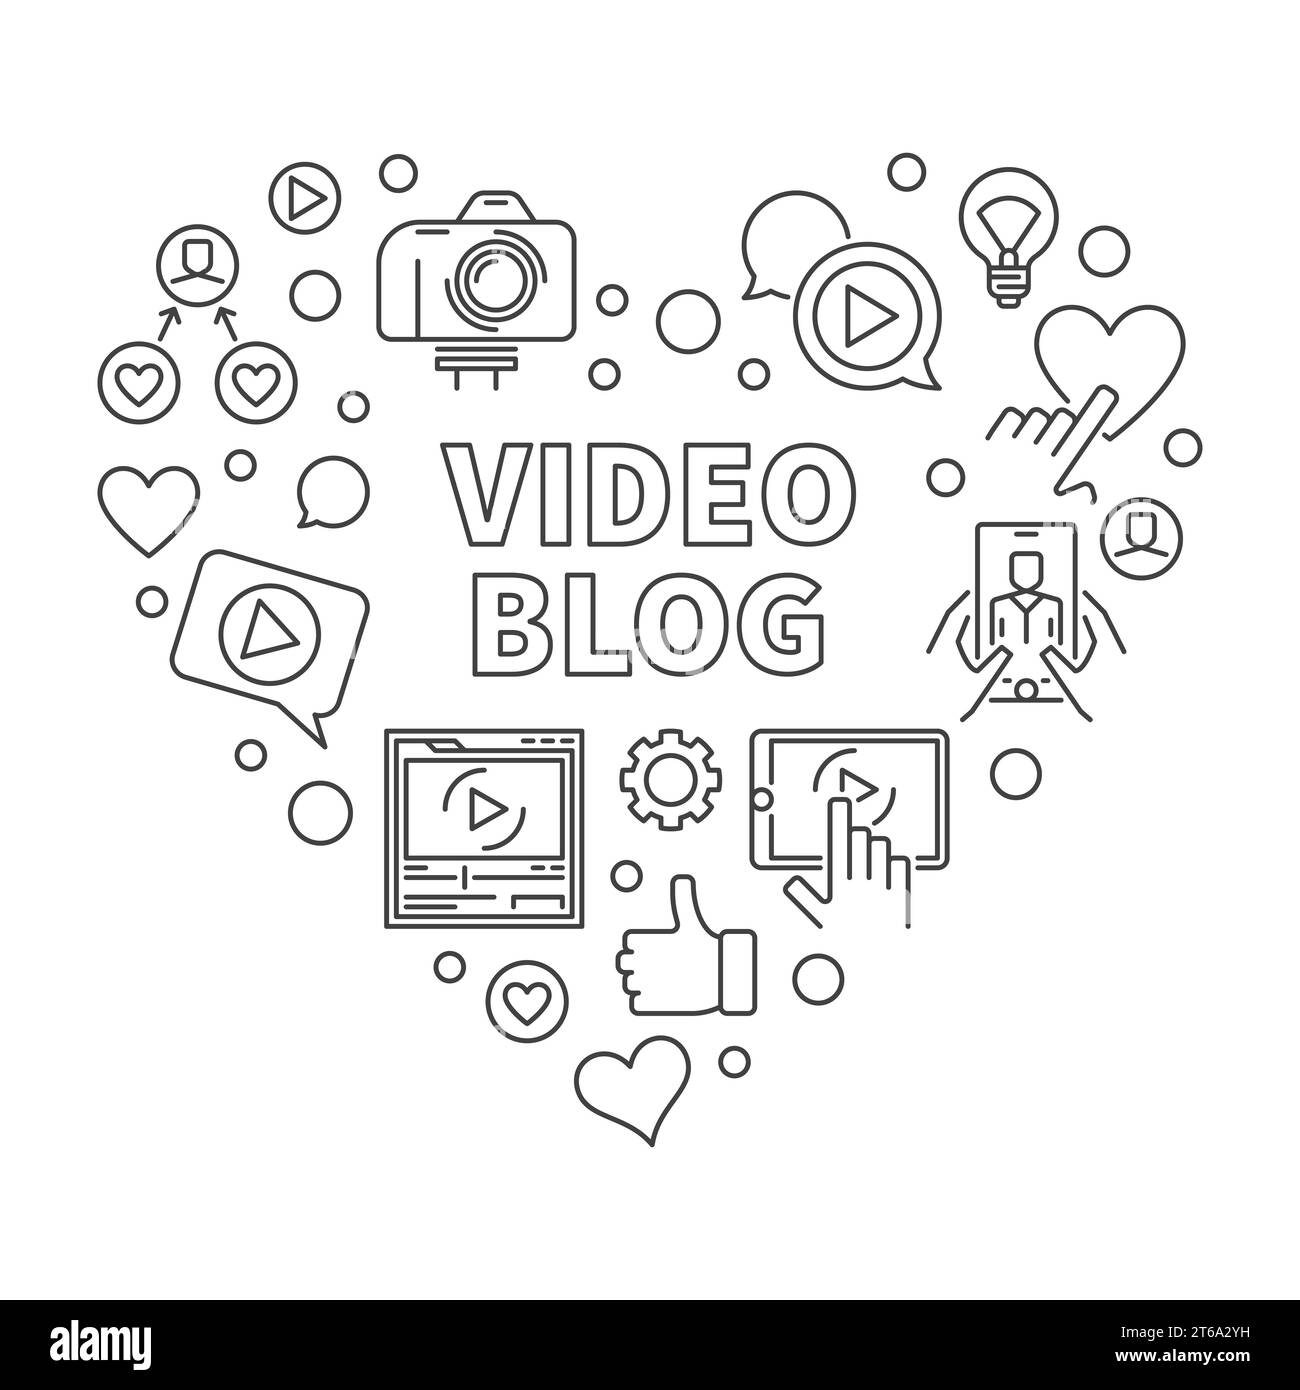 Video Blog Heart vector concept blue illustration in thin line style Stock Vector